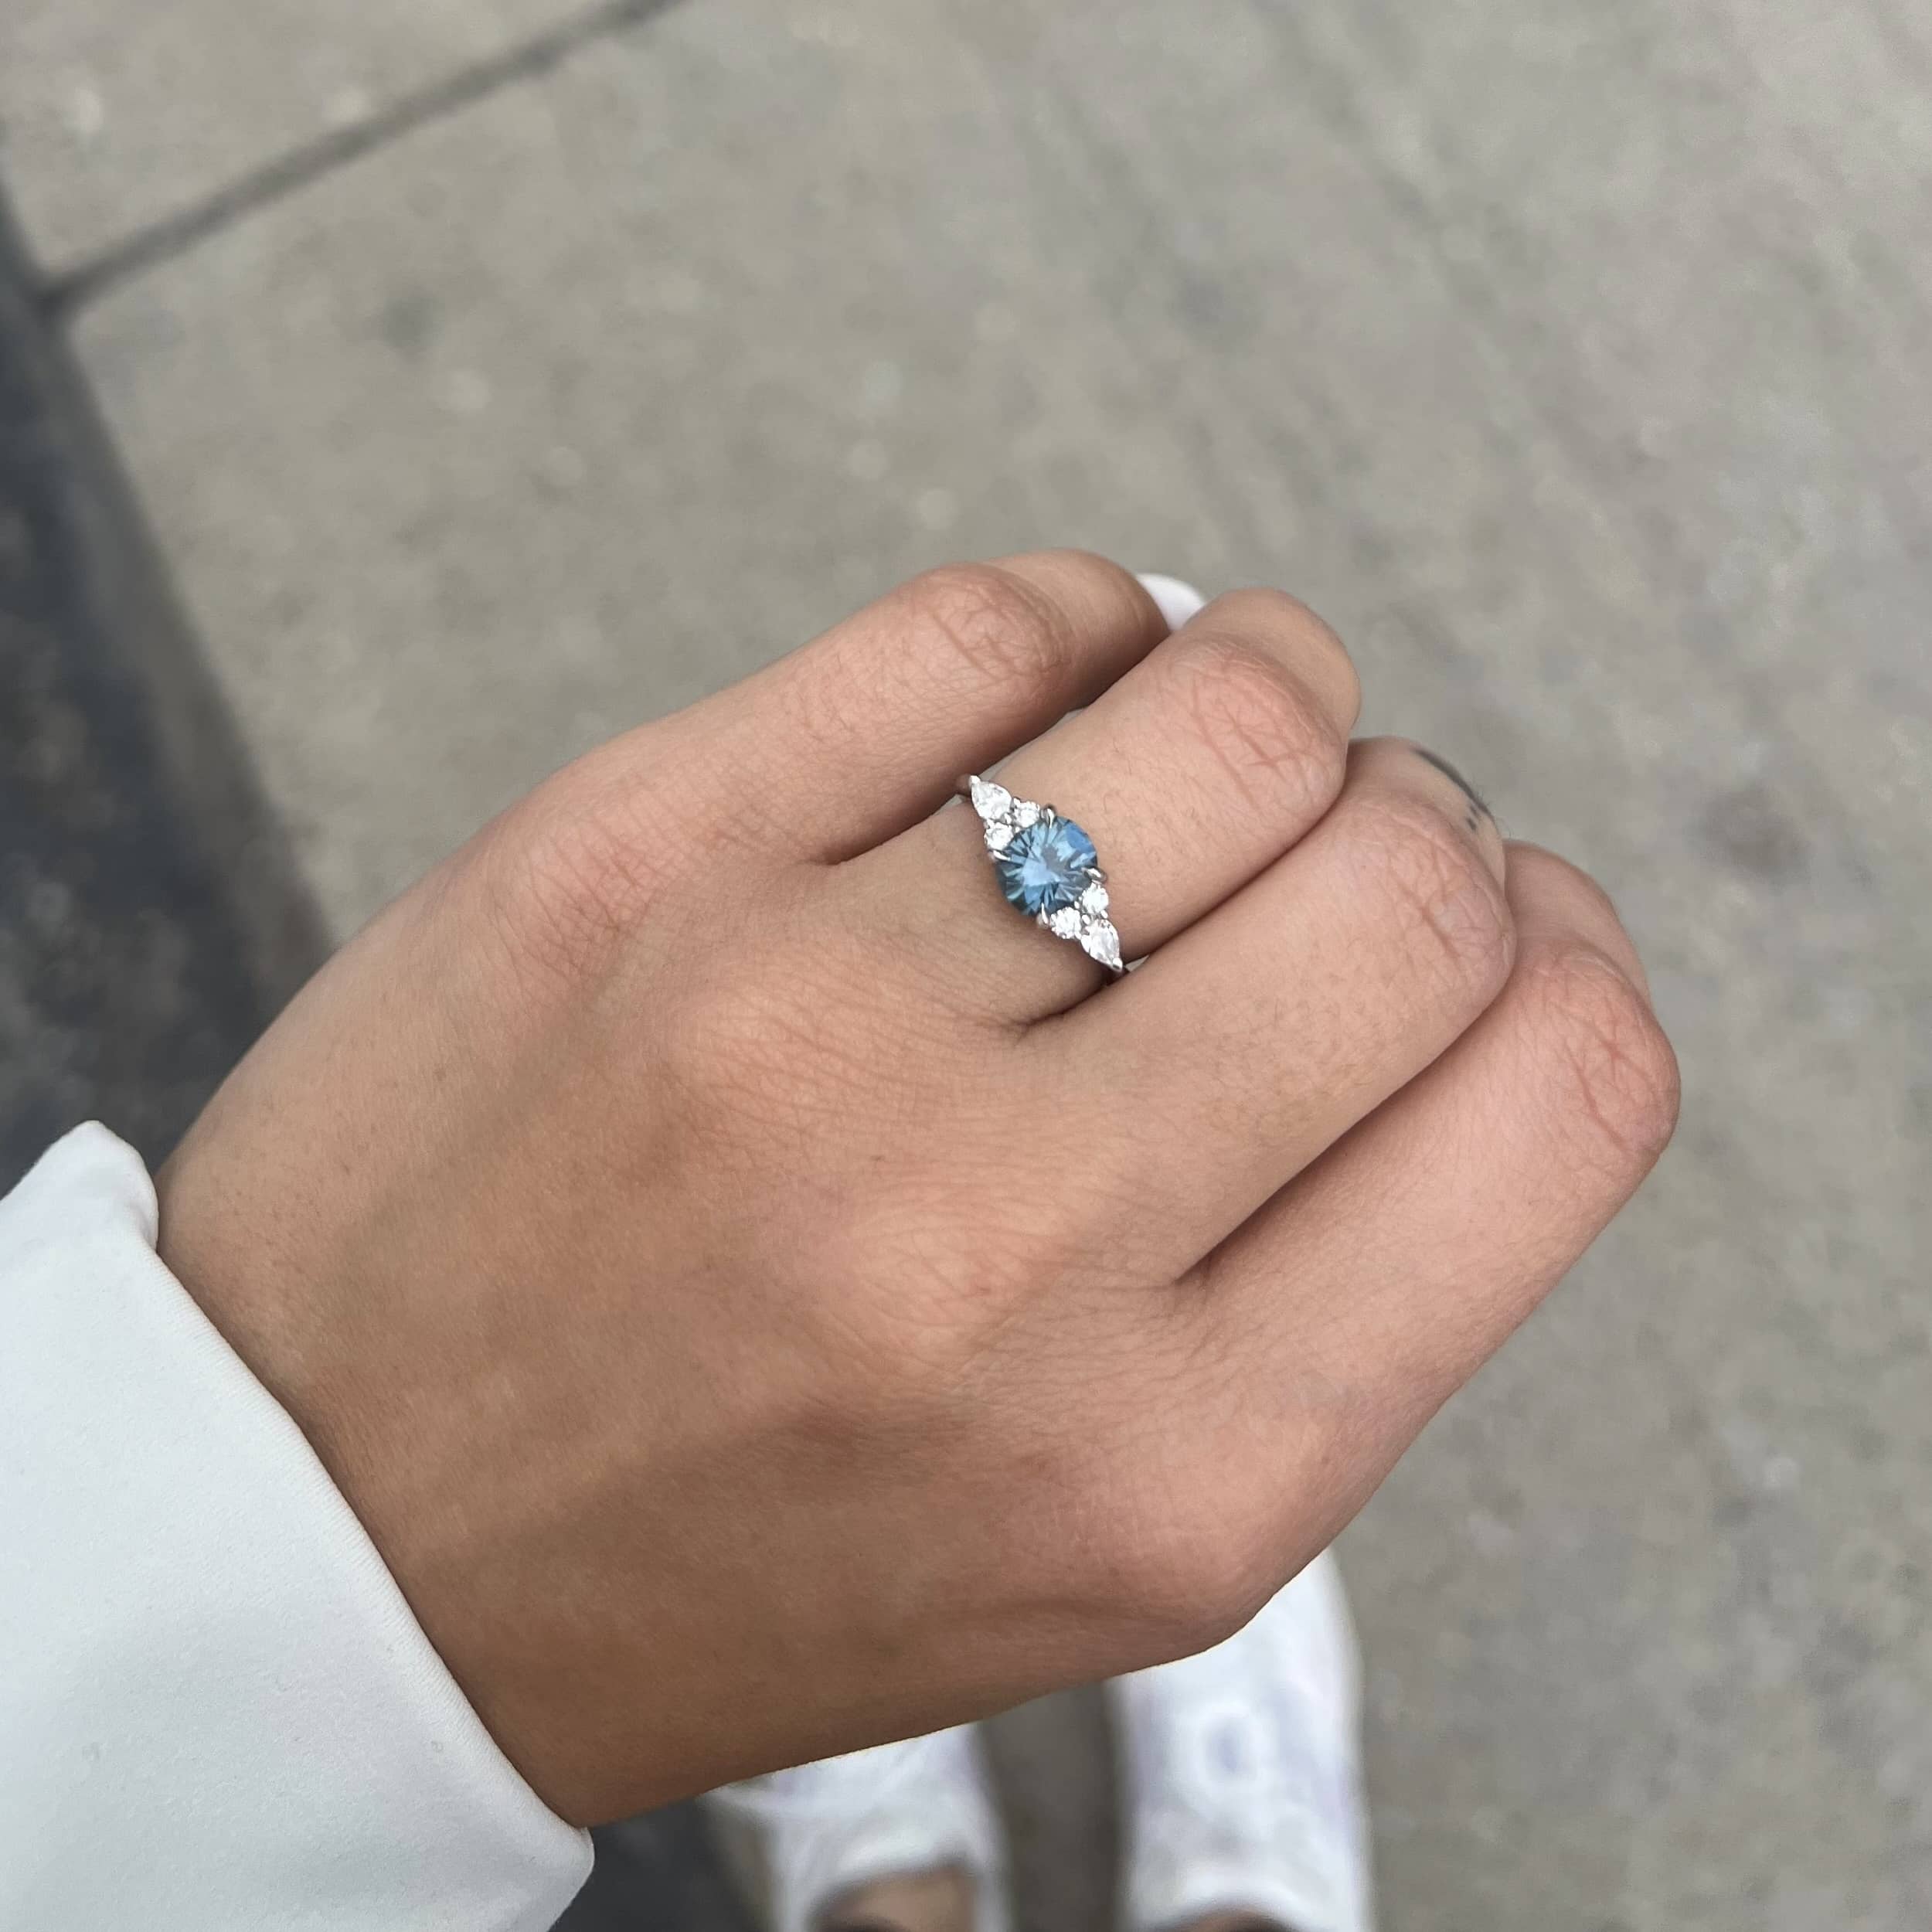 A photo from a customer review featuring a hand wearing a "Vela" ring in platinum with 1.68-carat Montana sapphire